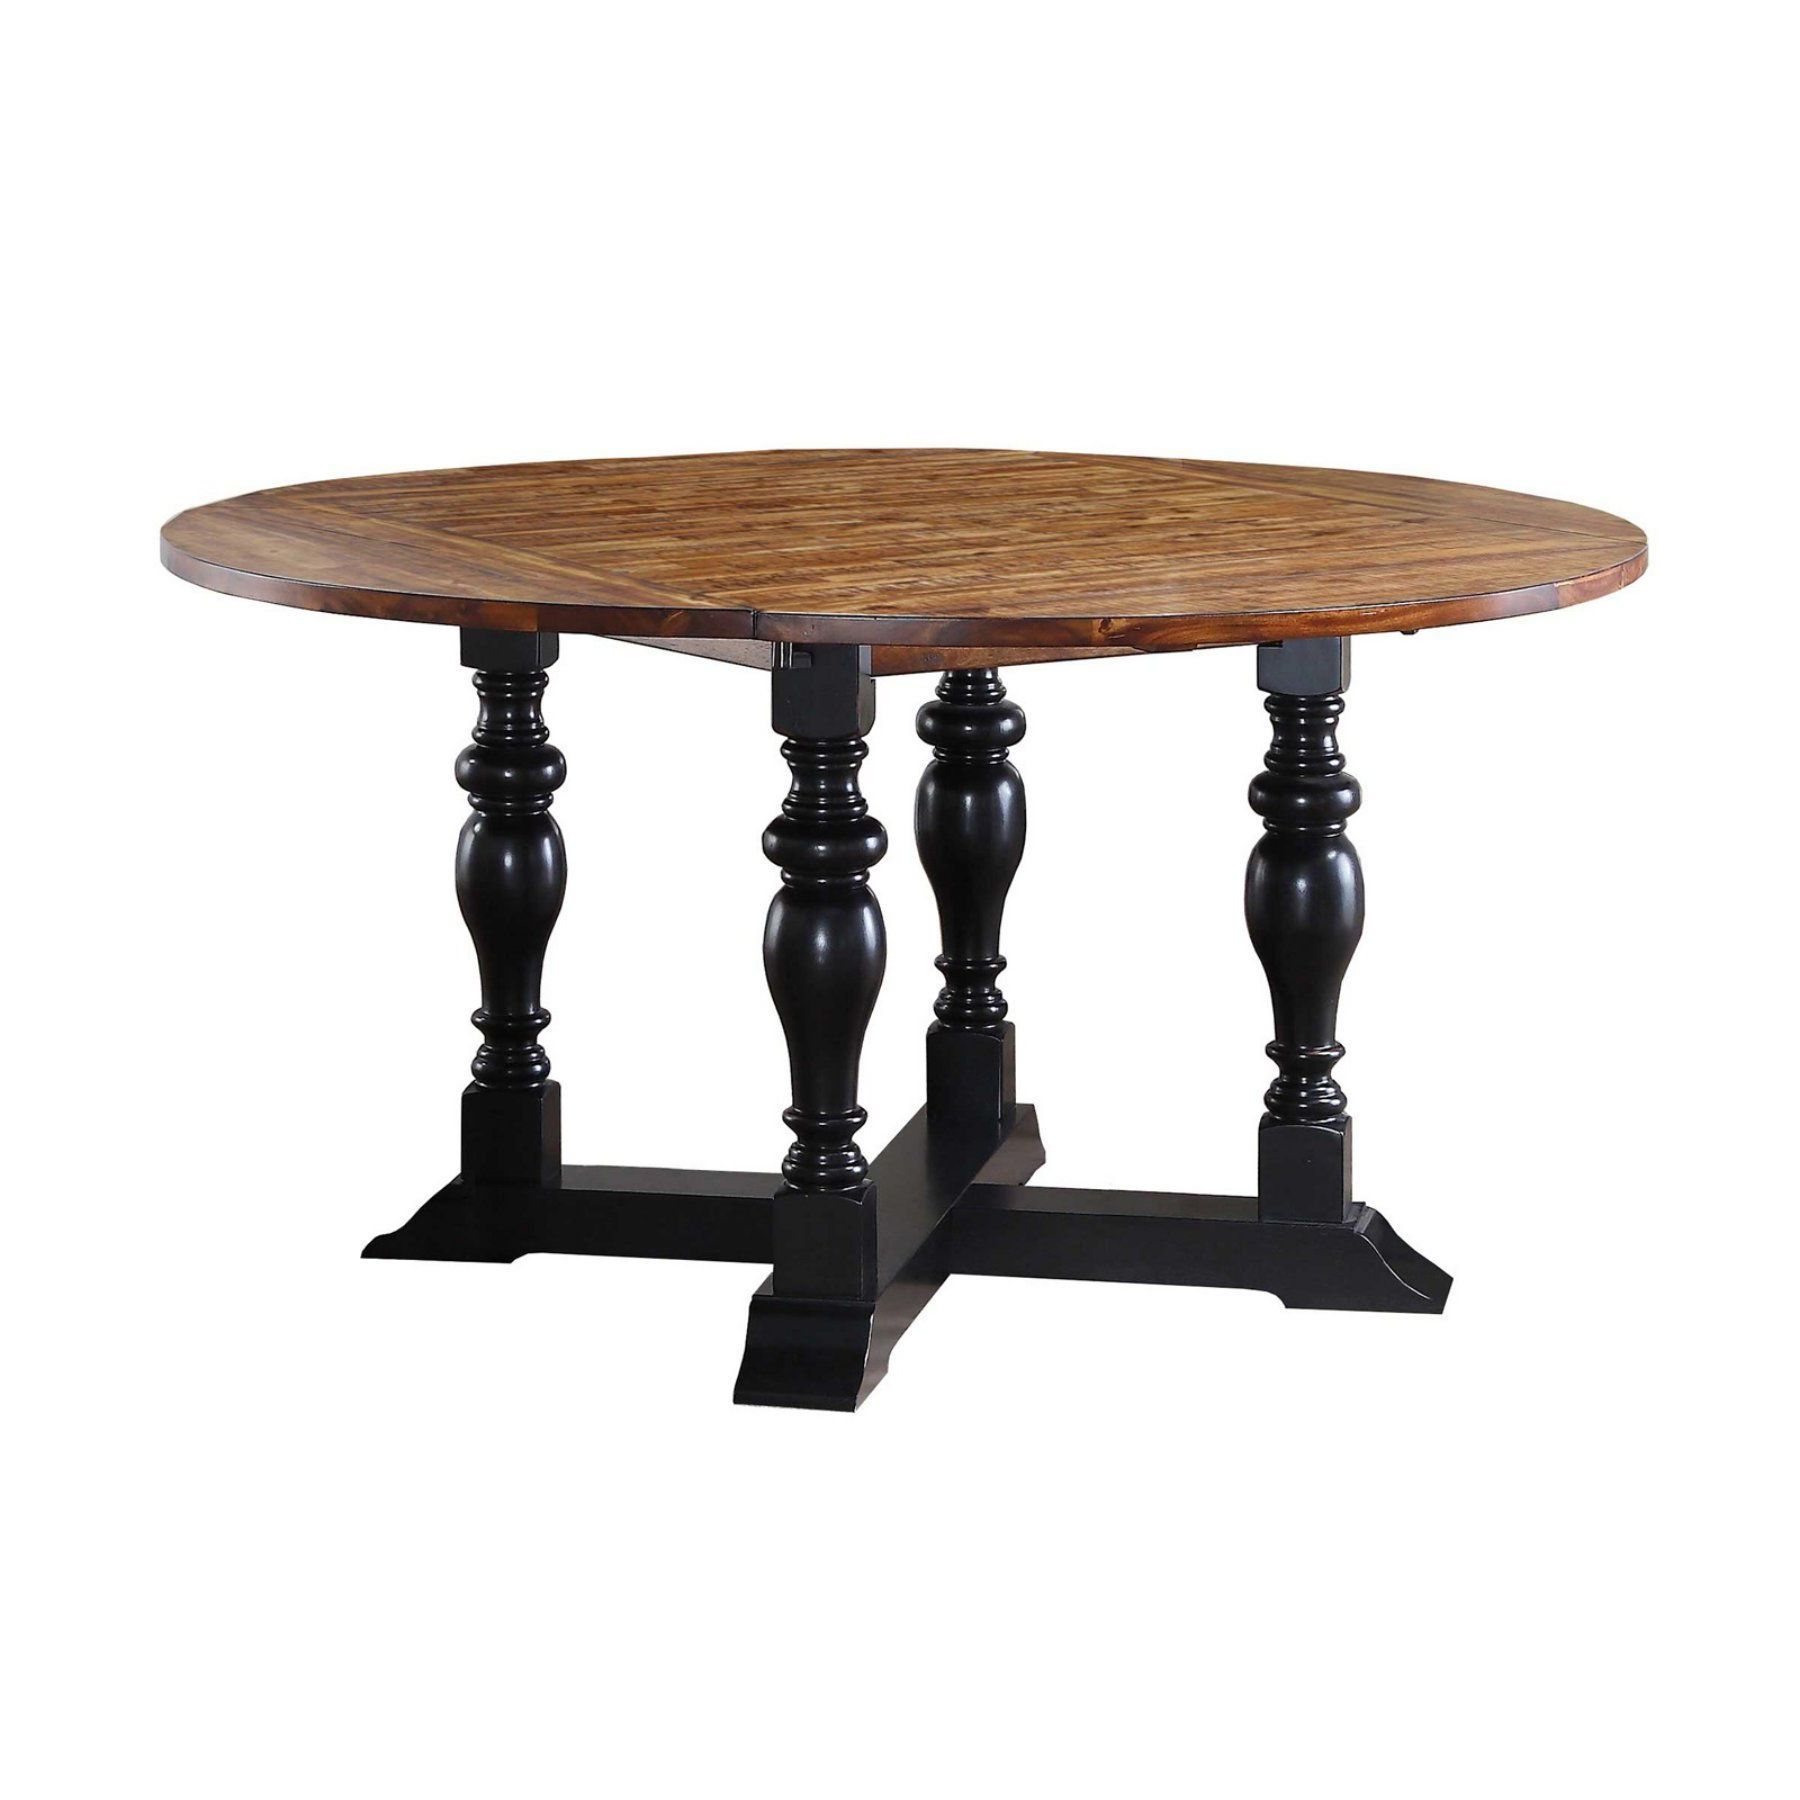 Most Popular Wood Kitchen Dining Tables With Removable Center Leaf Pertaining To Winners Only 60 In (View 5 of 25)